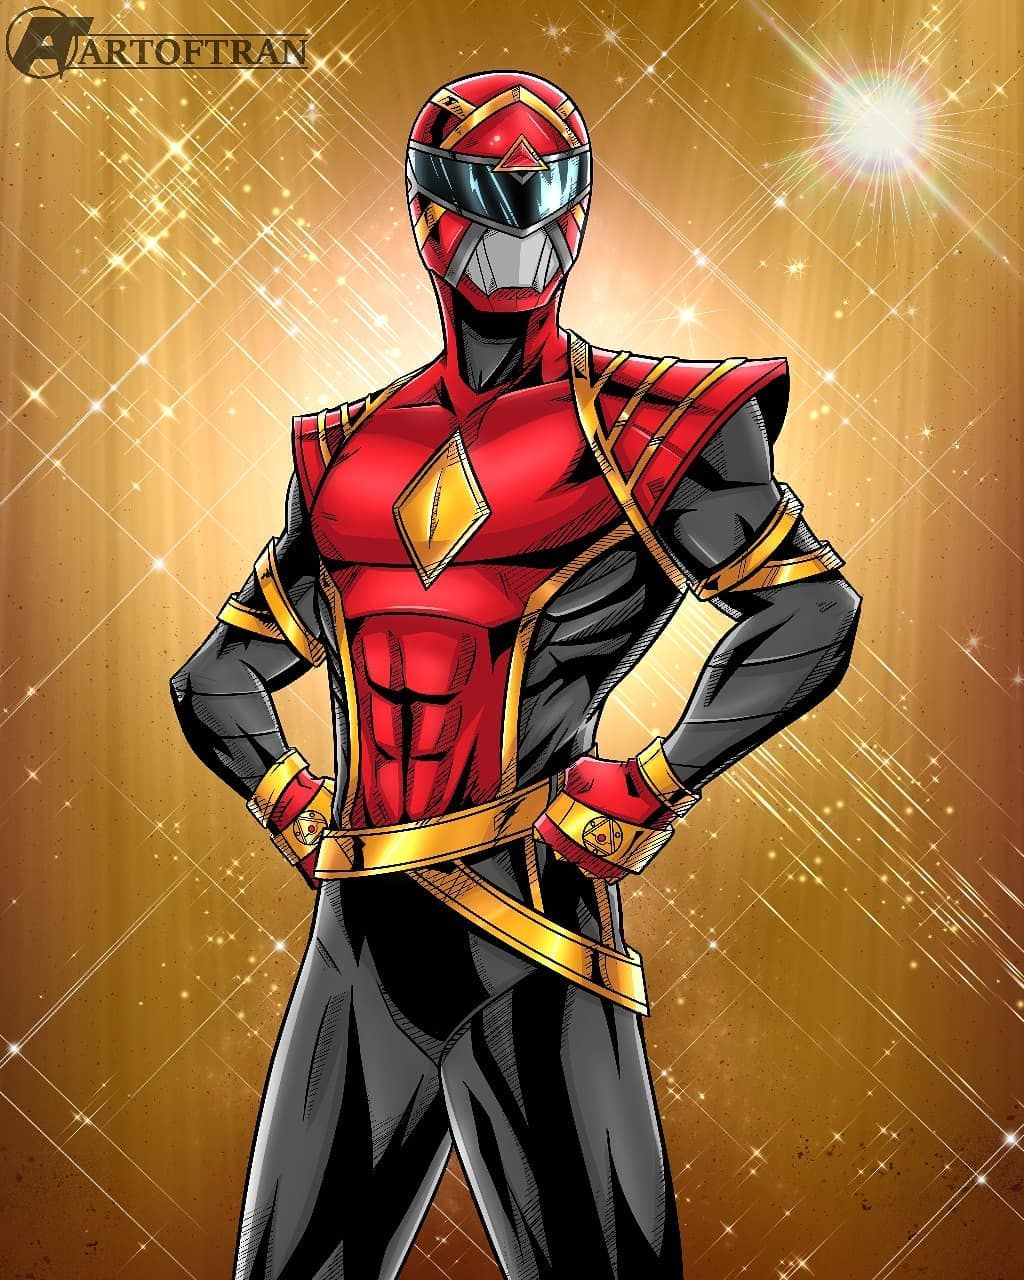 Tin Hung Vo Tran on Instagram: “Yall seen it!? A new OFFICIAL ranger form for Jason, the Red Omega Ranger from the Boom MMPR com. Omega red, Ranger, Power rangers